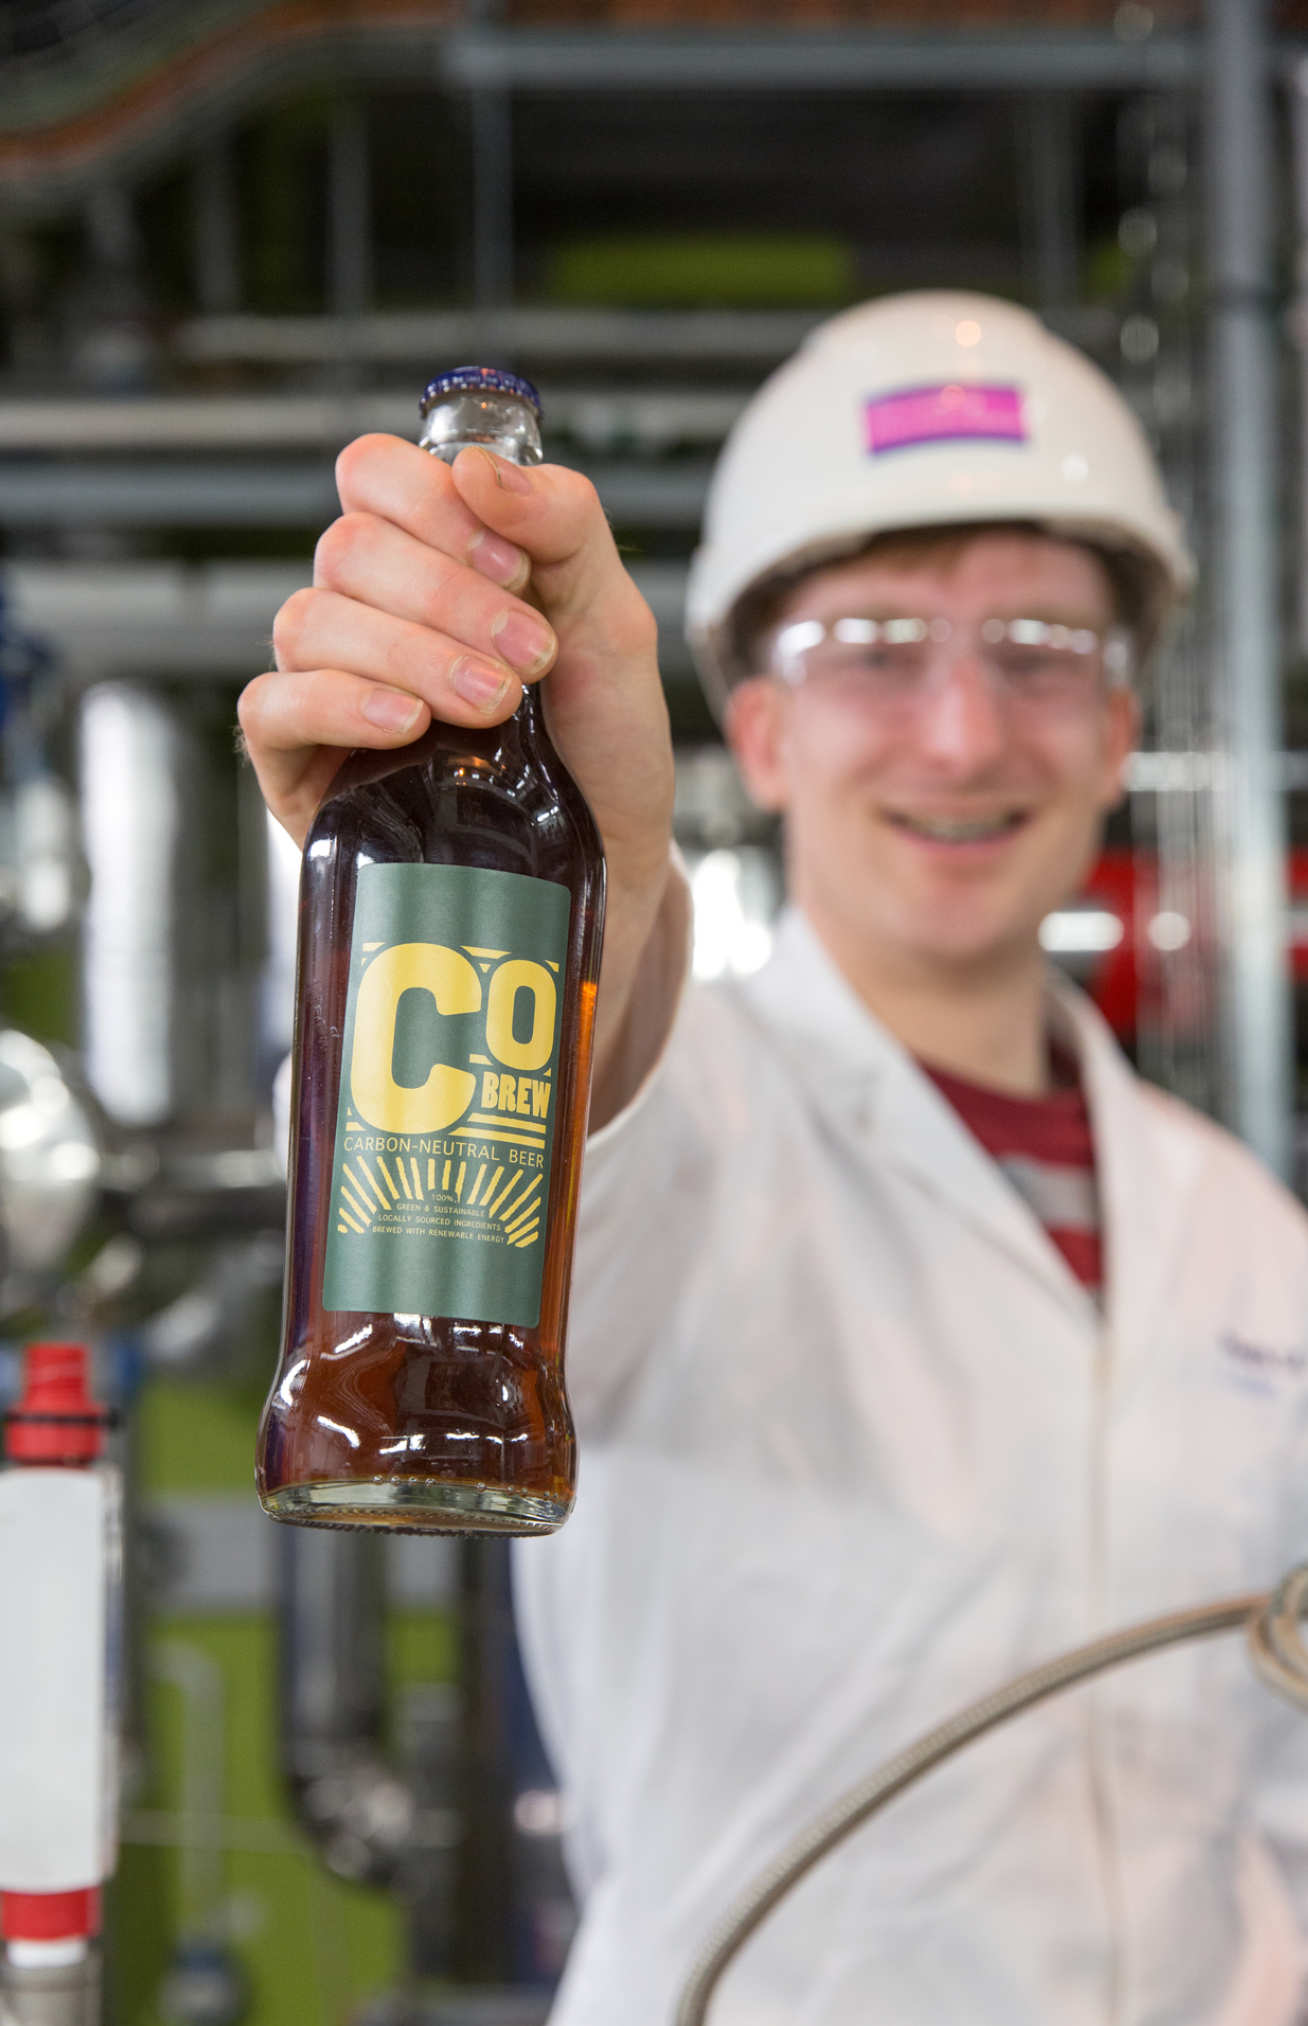 Matt Barker holds a bottle of the CObrew beer in the Carbon Capture Pilot Plant